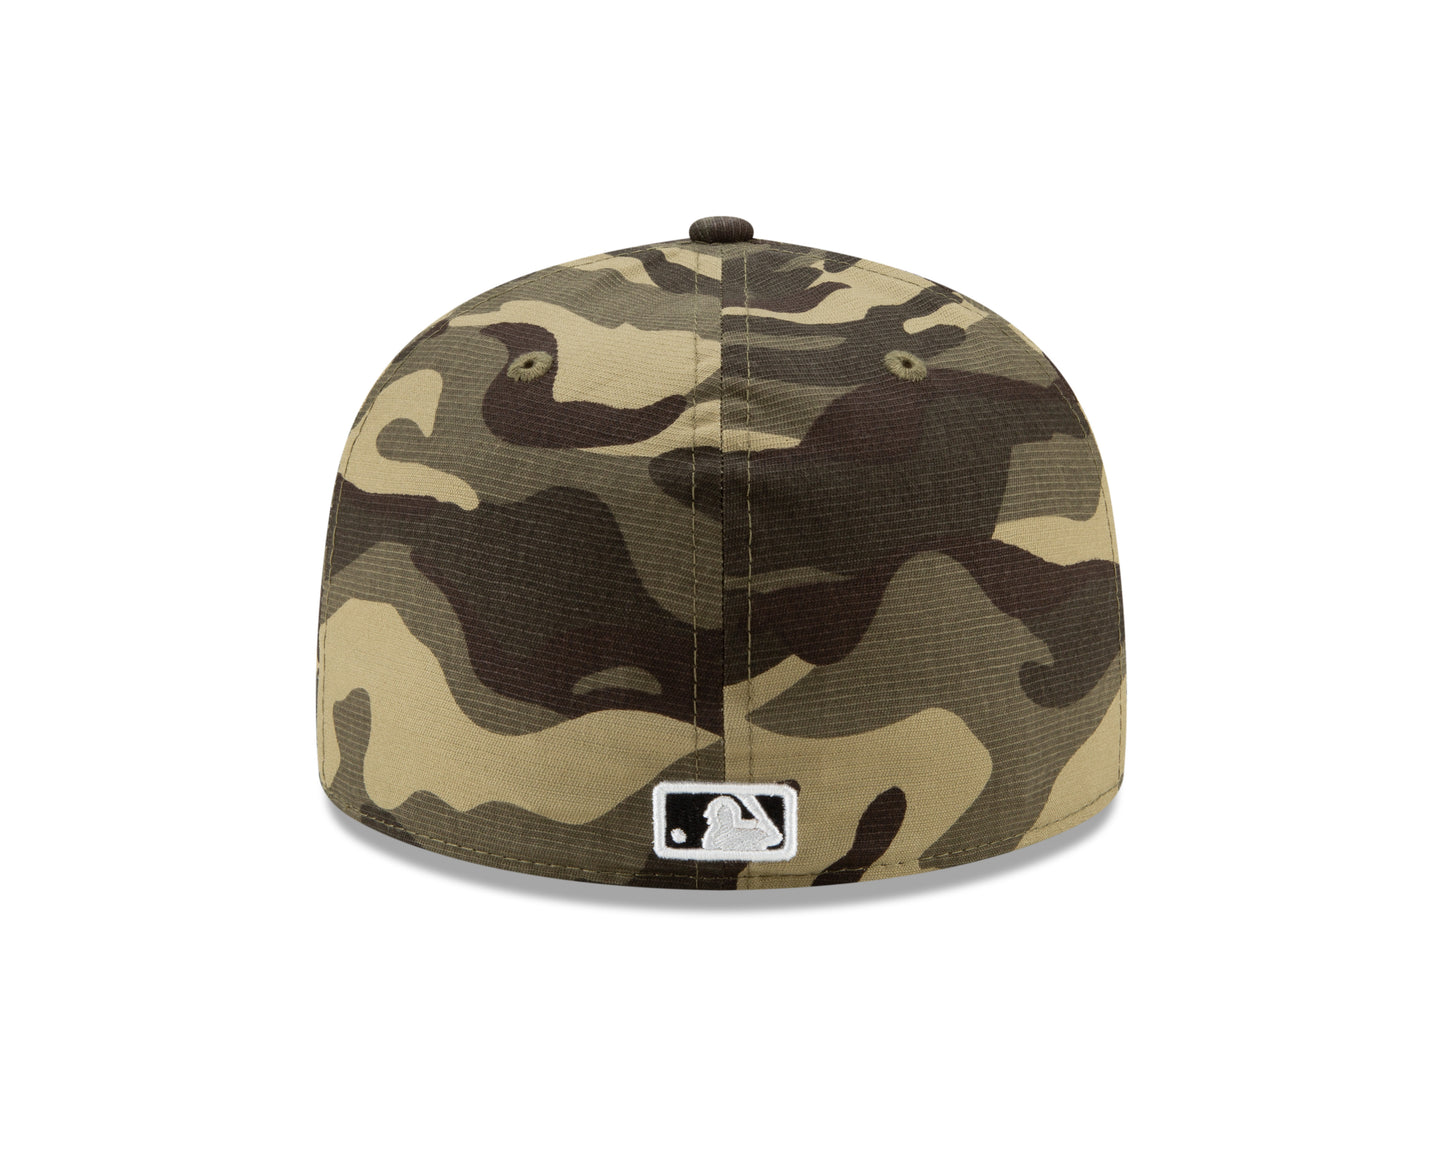 Washington Nationals New Era MLB Armed Forces Day On-Field 59FIFTY Hat